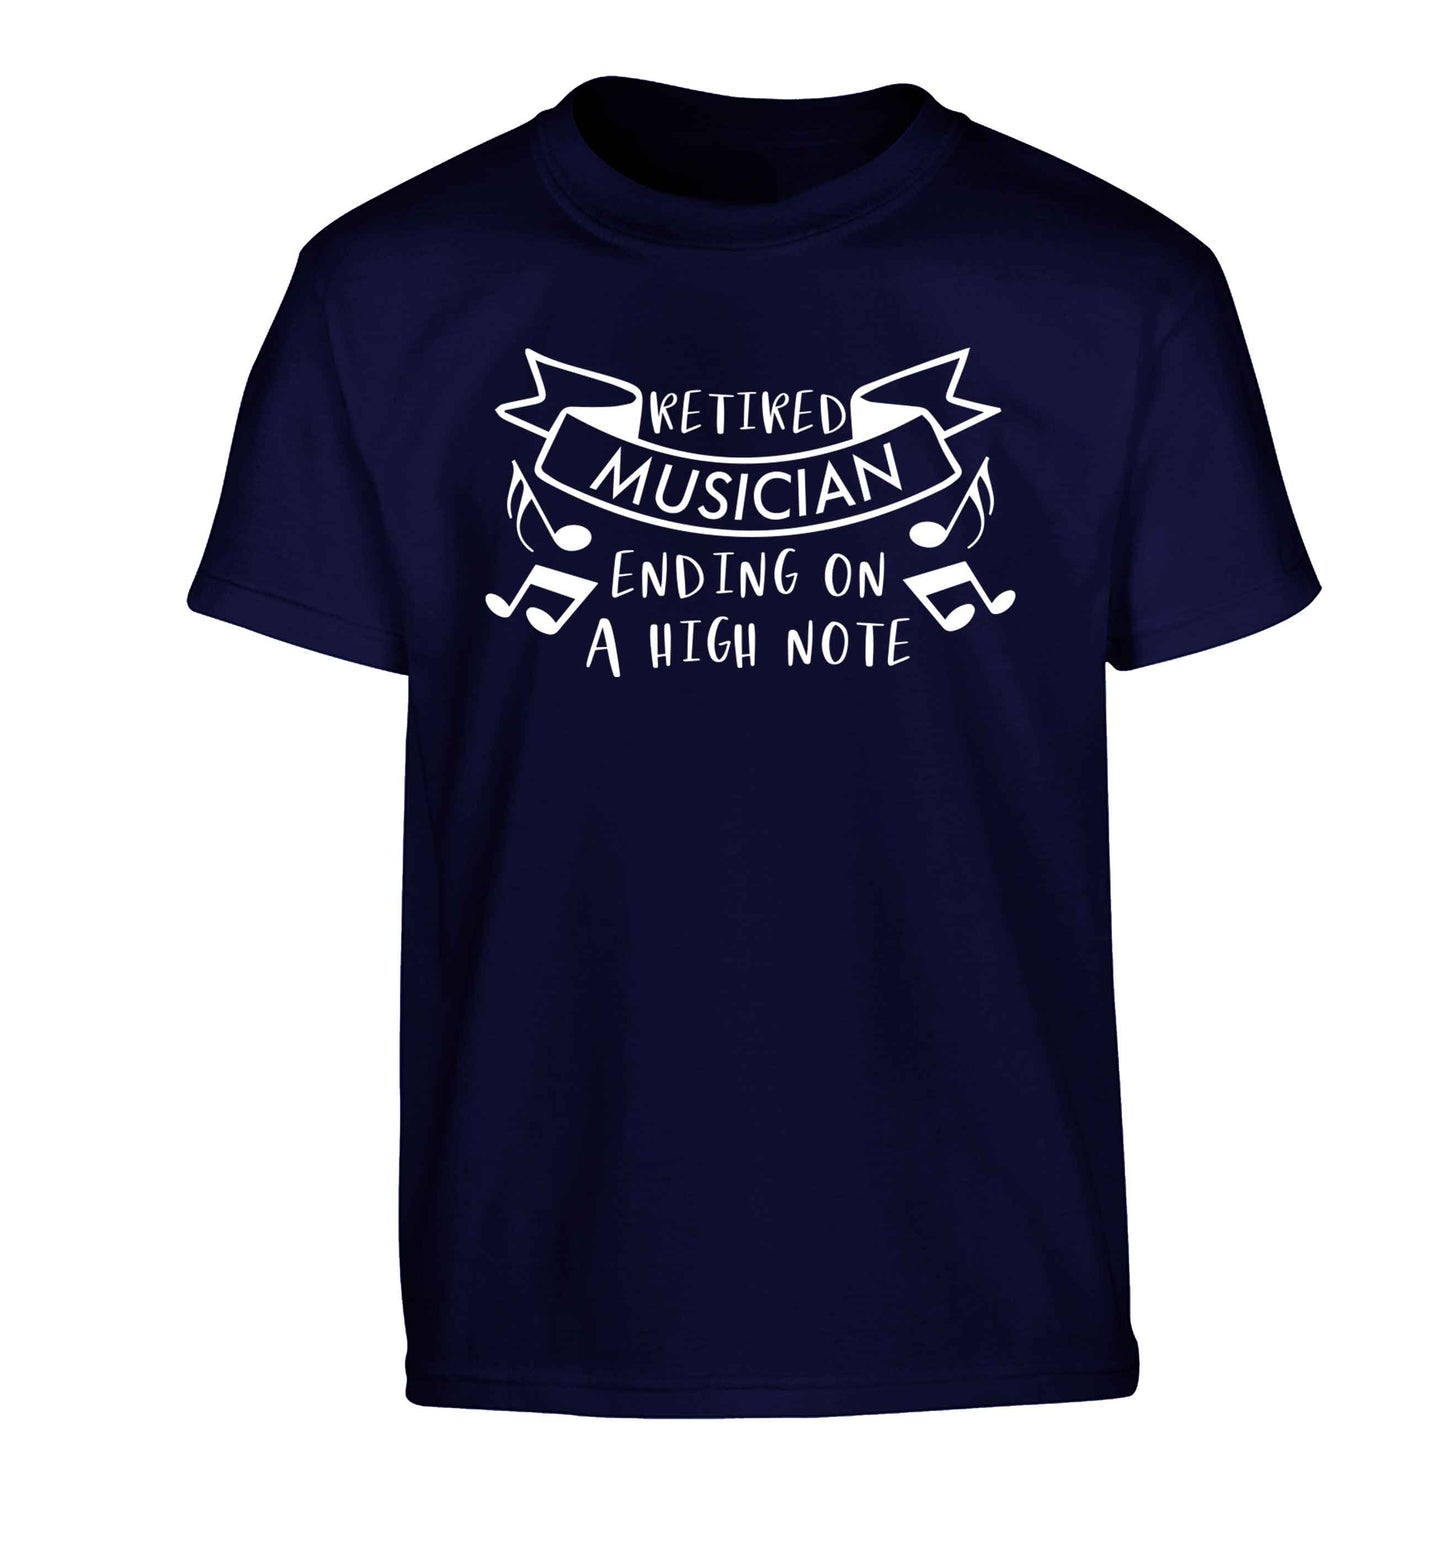 Retired musician ending on a high note Children's navy Tshirt 12-13 Years